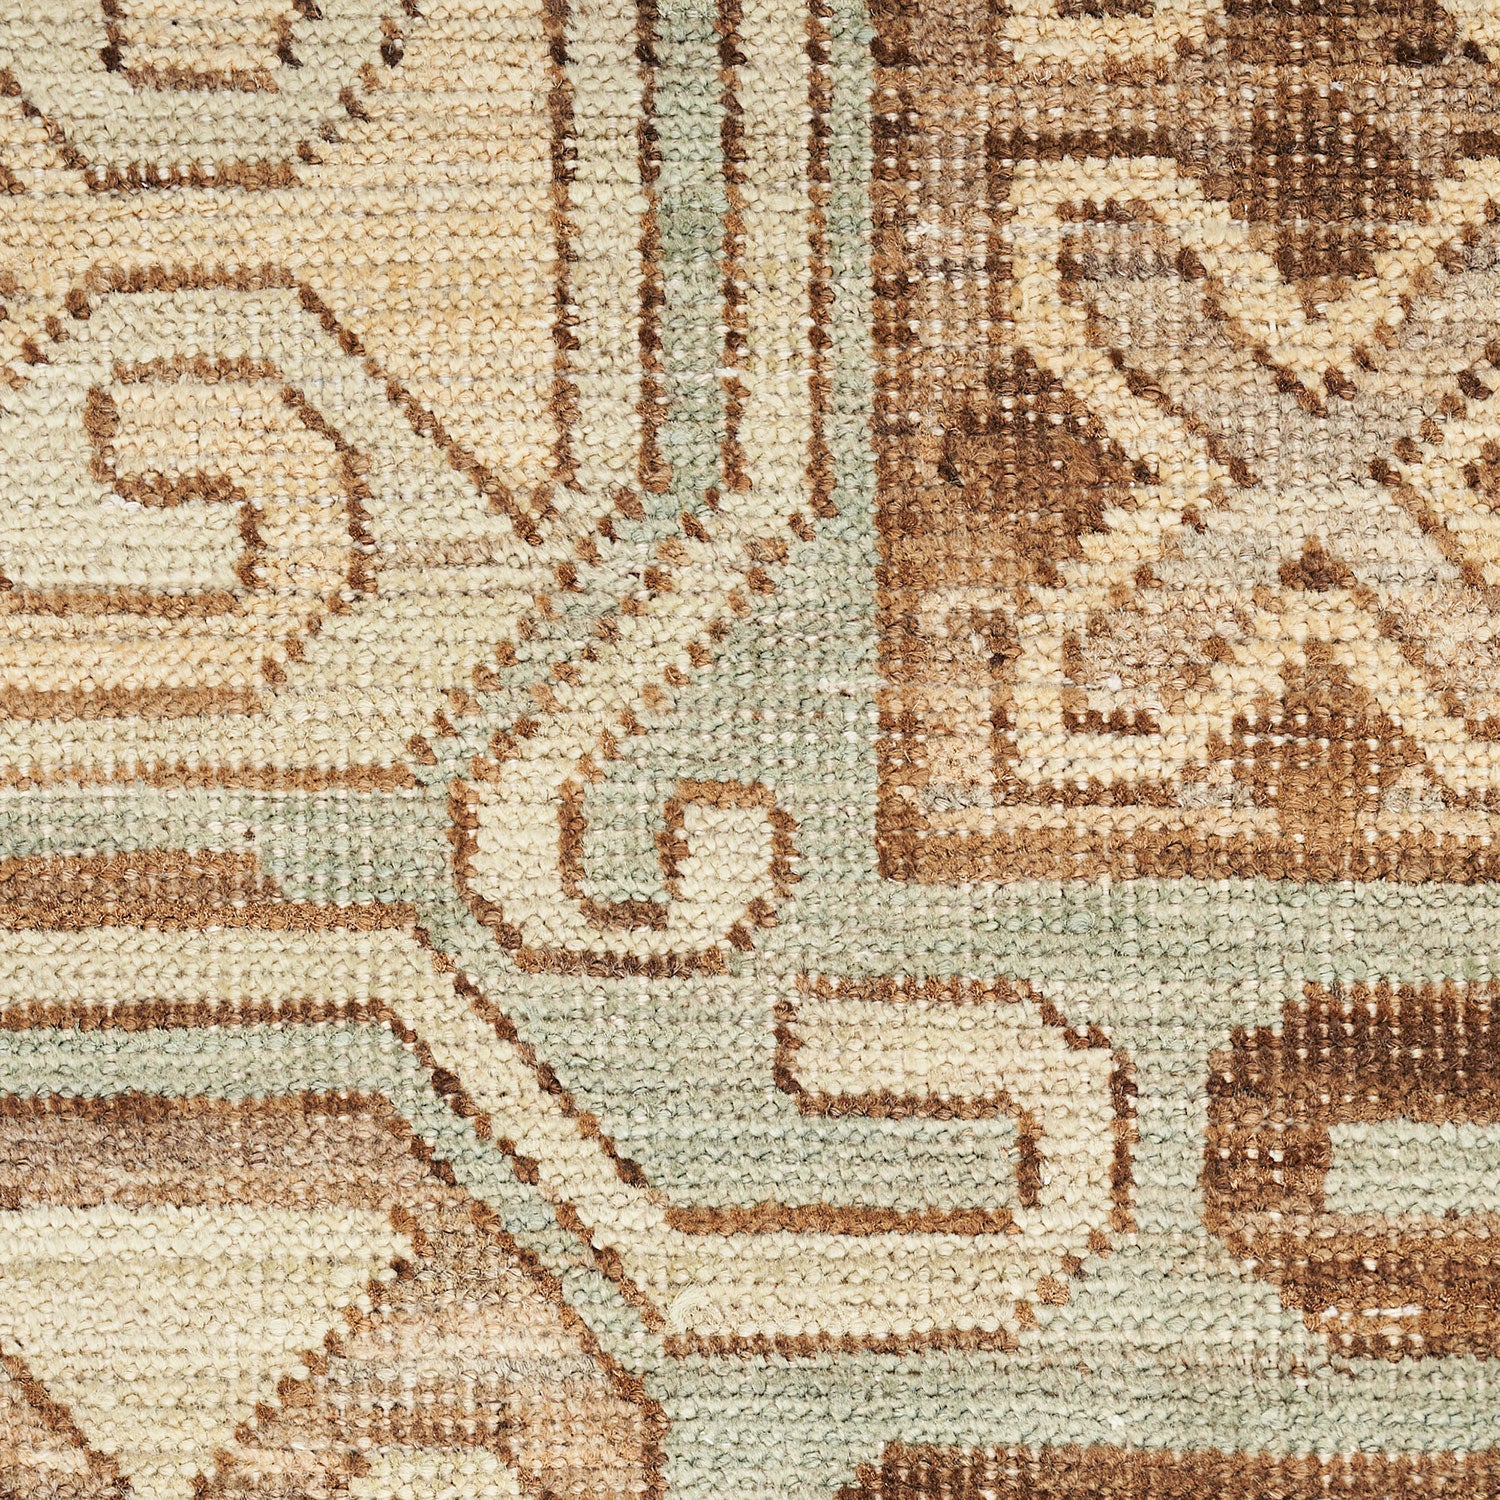 Close-up of a durable woven carpet with intricate geometric designs.